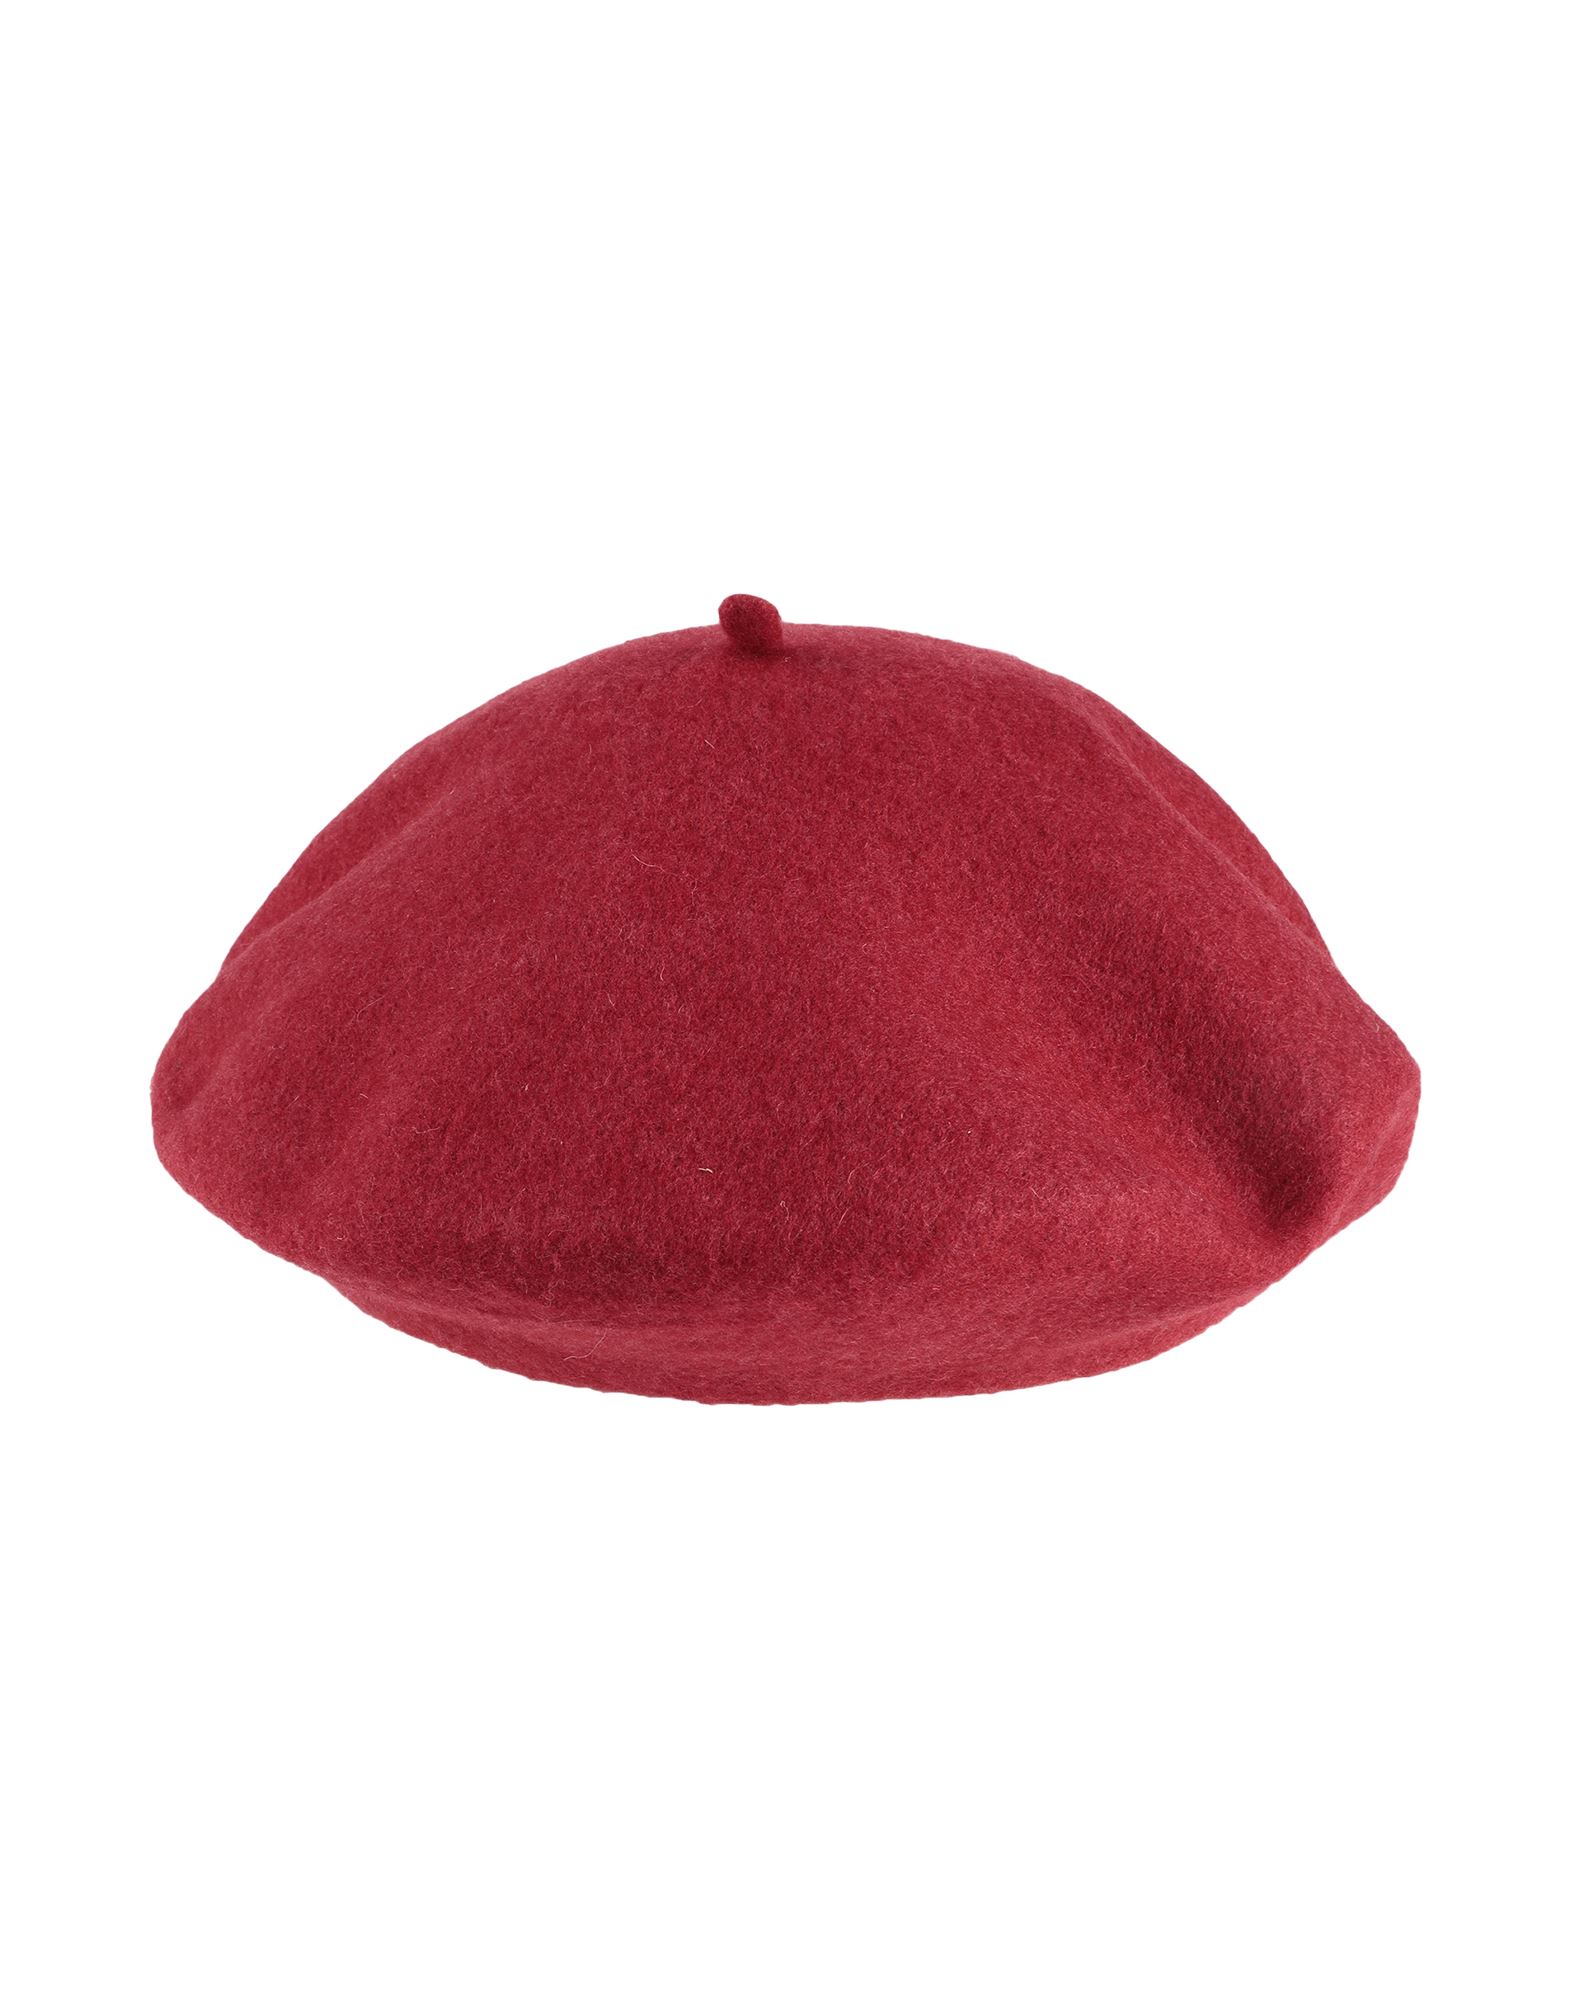  Other Stories Men's Hat - Red